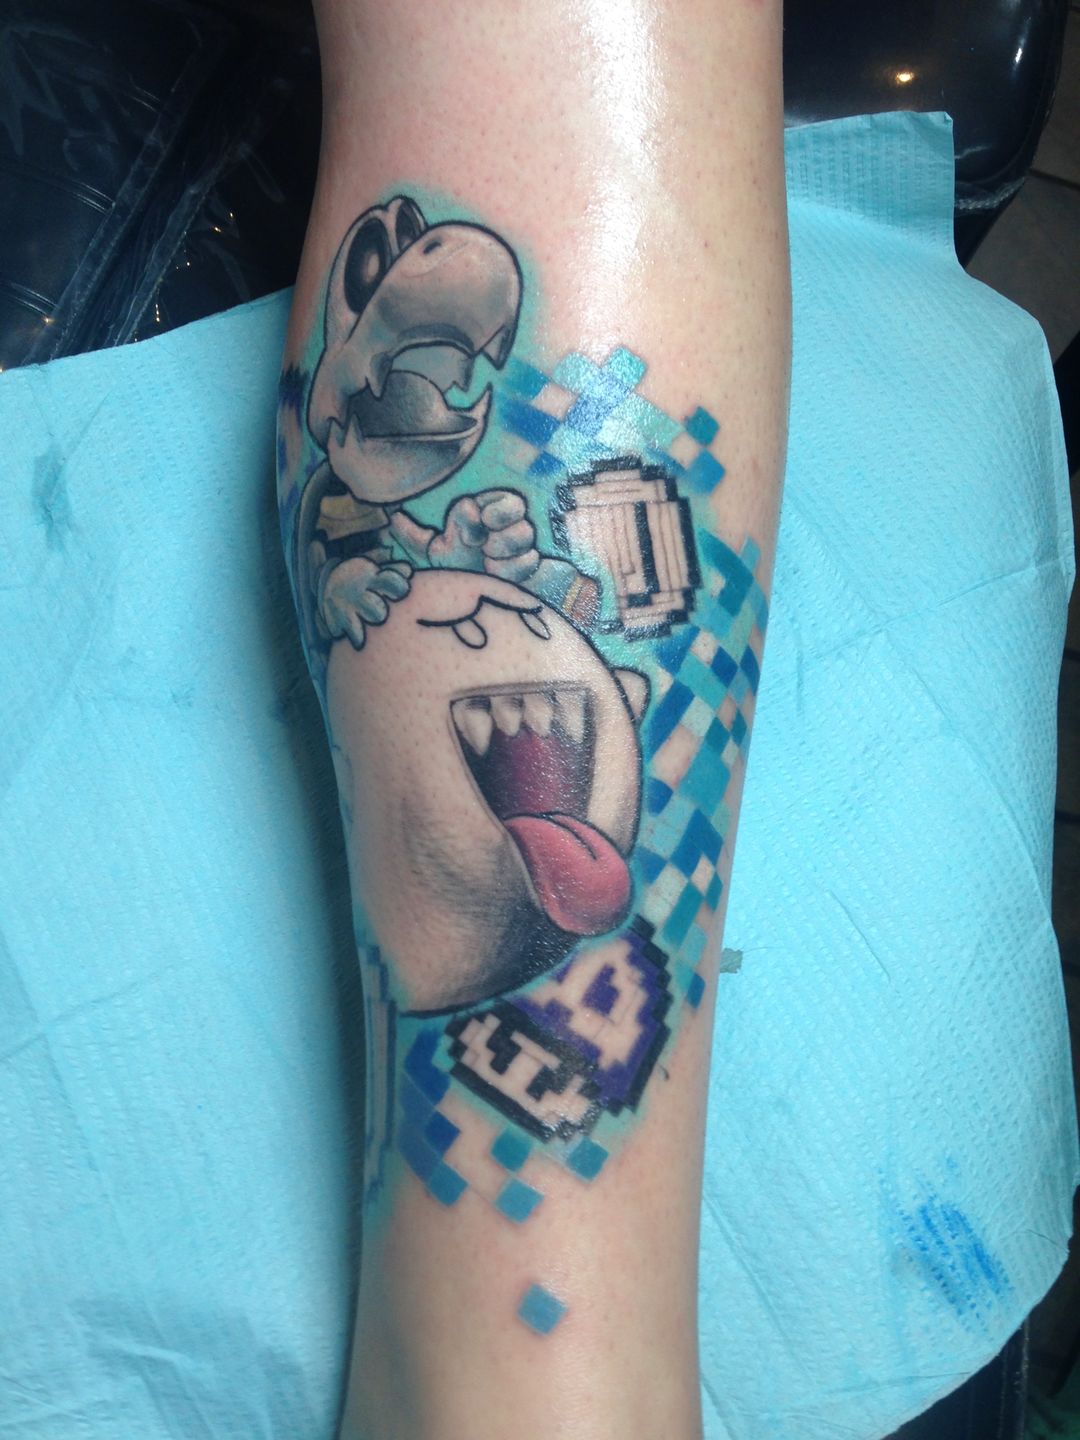 Continued off the Super Mario sleeve to a chest piece Done by Jerrett  Spaeth  Thunderhand Tattoo  rtattoo